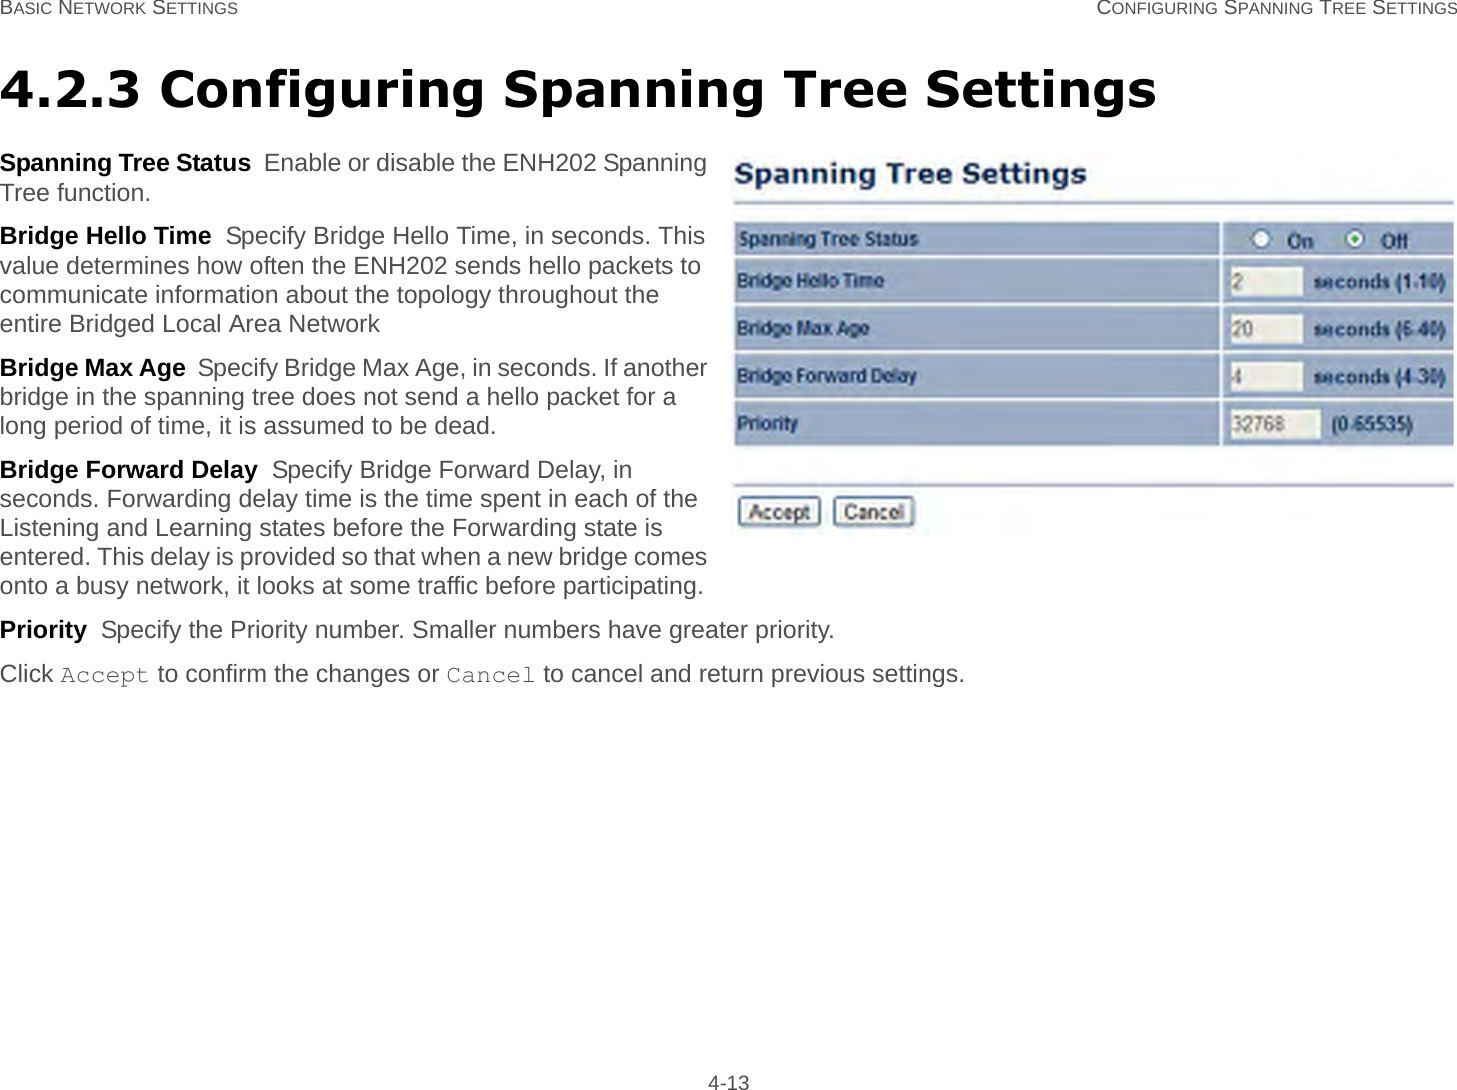 BASIC NETWORK SETTINGS CONFIGURING SPANNING TREE SETTINGS 4-134.2.3 Configuring Spanning Tree SettingsSpanning Tree Status  Enable or disable the ENH202 Spanning Tree function.Bridge Hello Time  Specify Bridge Hello Time, in seconds. This value determines how often the ENH202 sends hello packets to communicate information about the topology throughout the entire Bridged Local Area NetworkBridge Max Age  Specify Bridge Max Age, in seconds. If another bridge in the spanning tree does not send a hello packet for a long period of time, it is assumed to be dead.Bridge Forward Delay  Specify Bridge Forward Delay, in seconds. Forwarding delay time is the time spent in each of the Listening and Learning states before the Forwarding state is entered. This delay is provided so that when a new bridge comes onto a busy network, it looks at some traffic before participating.Priority  Specify the Priority number. Smaller numbers have greater priority.Click Accept to confirm the changes or Cancel to cancel and return previous settings.